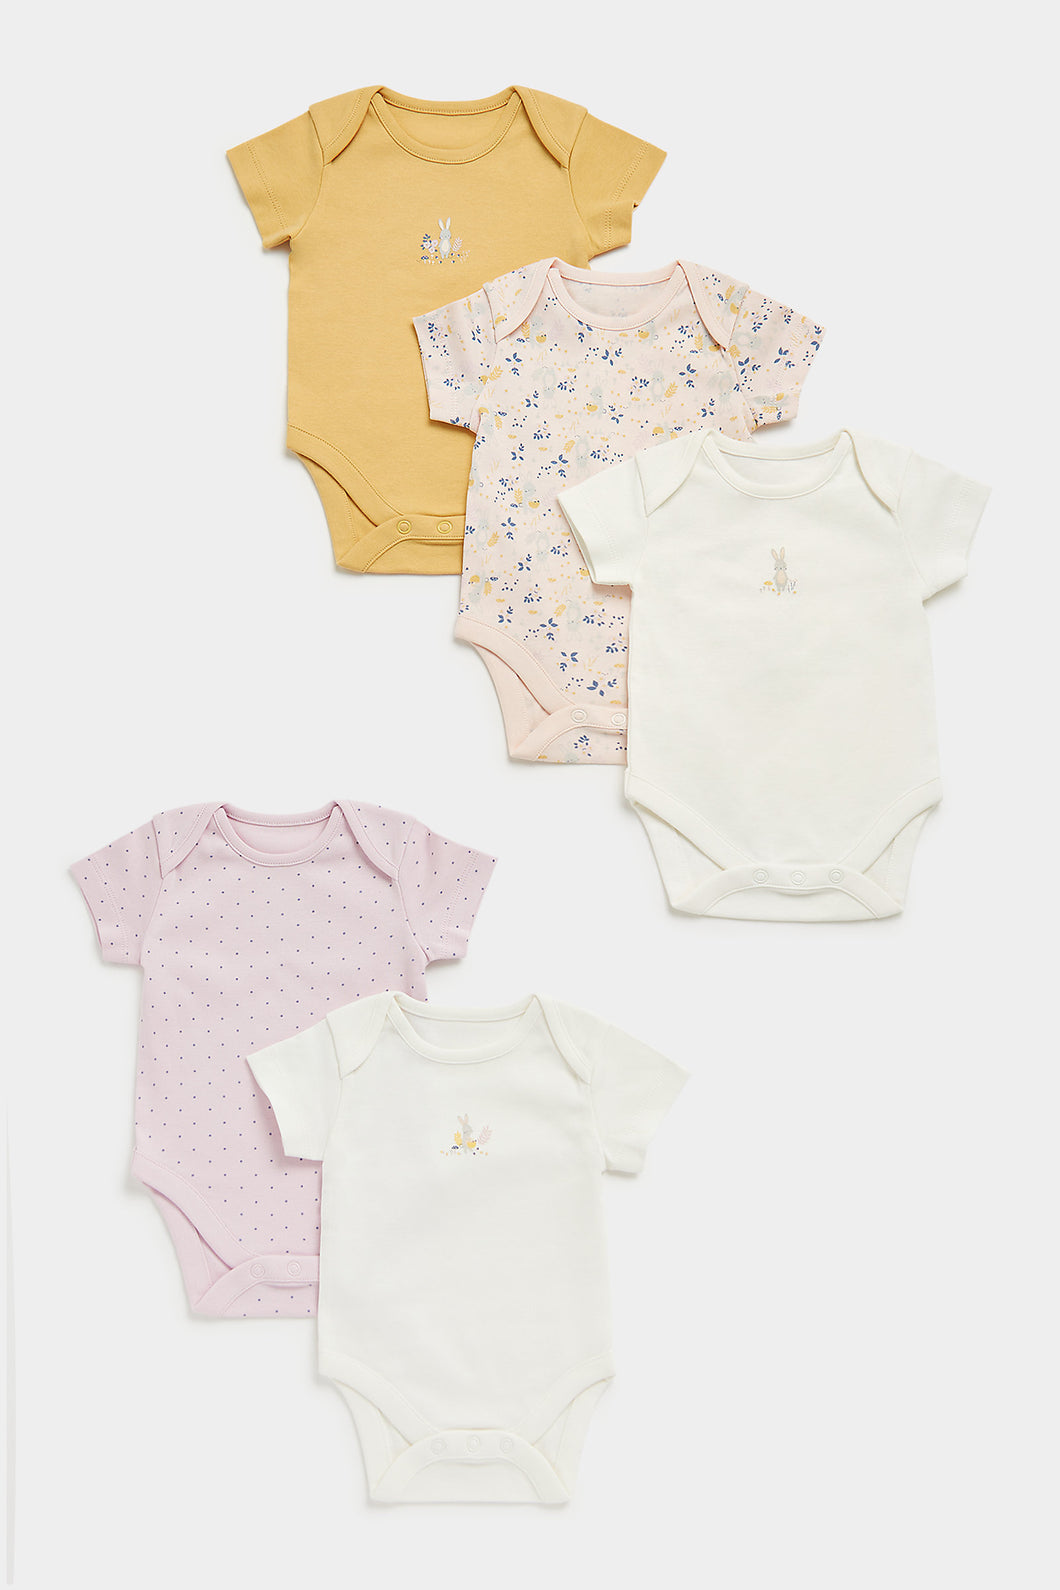 Mothercare Bunny Short-Sleeved Baby Bodysuits - 5 Pack